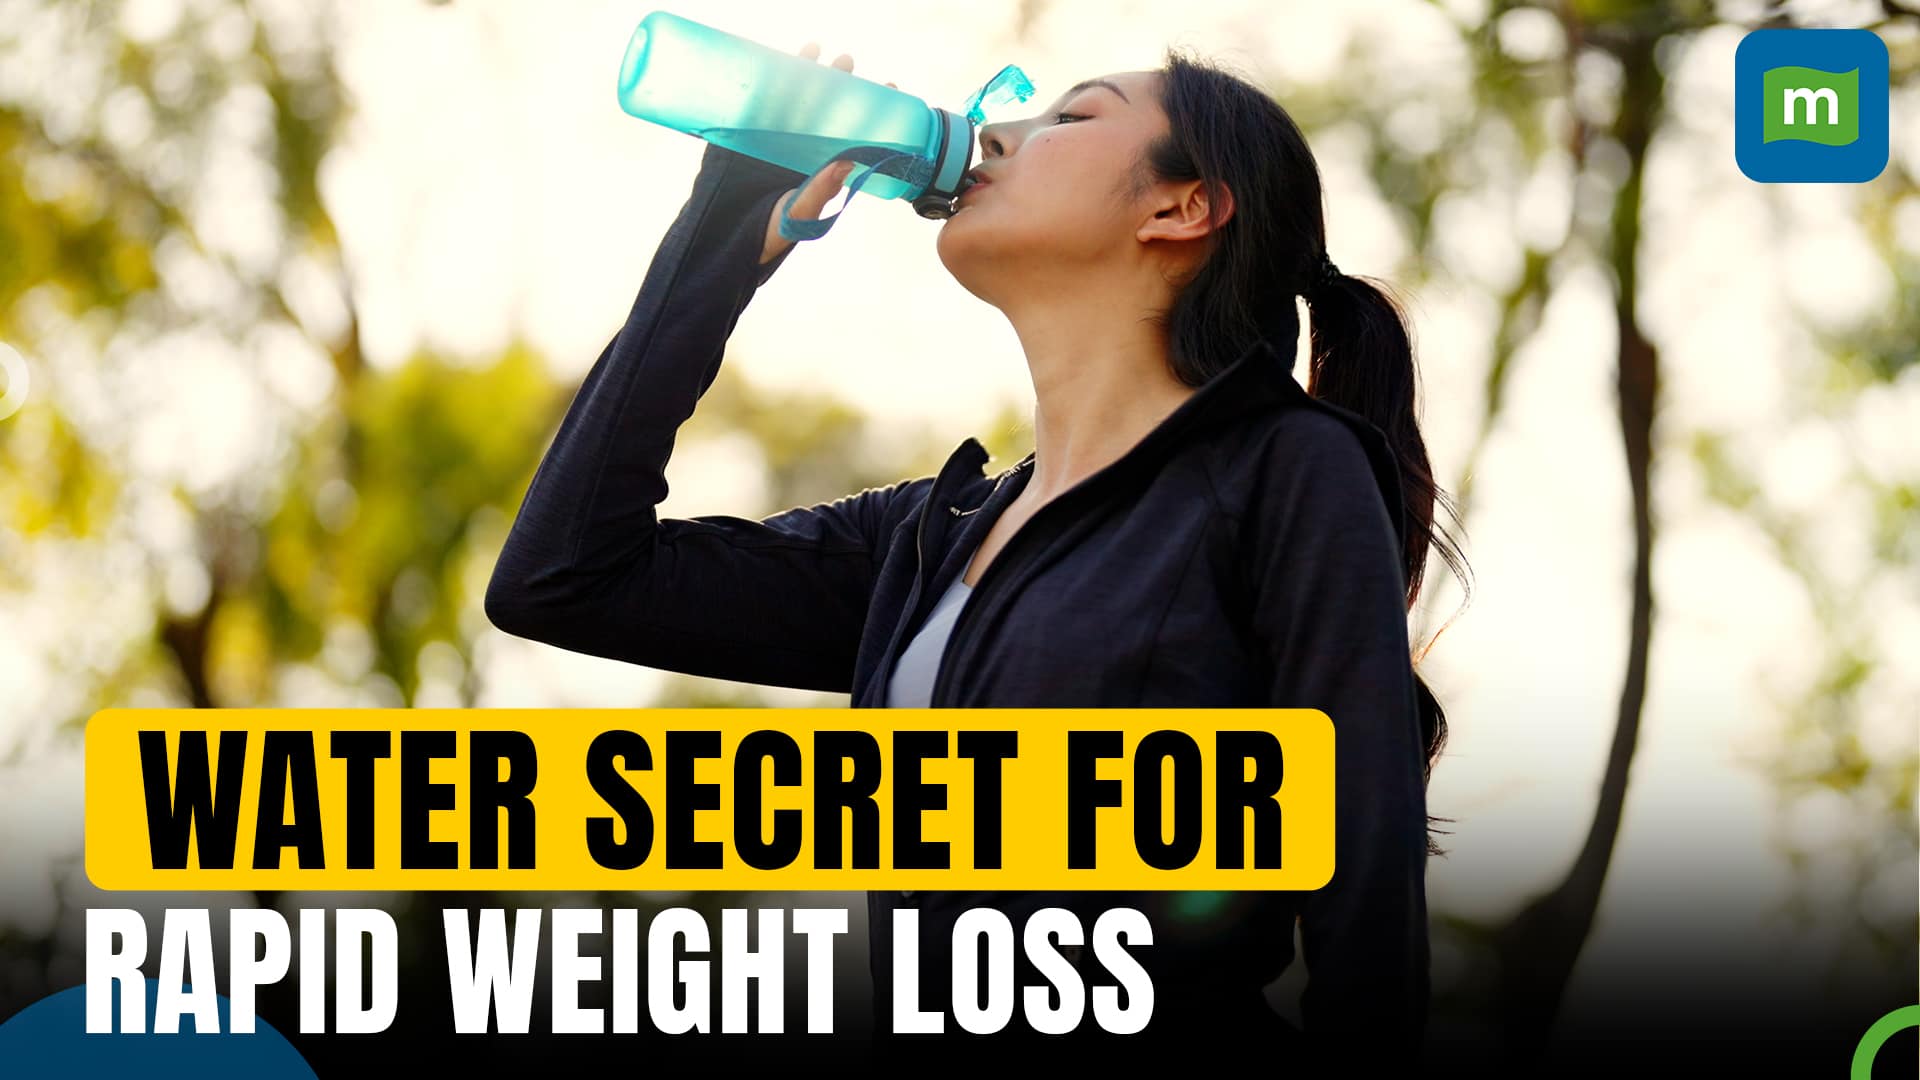 Drinking Water To Lose Weight: Does Cold Water Burn Calories?